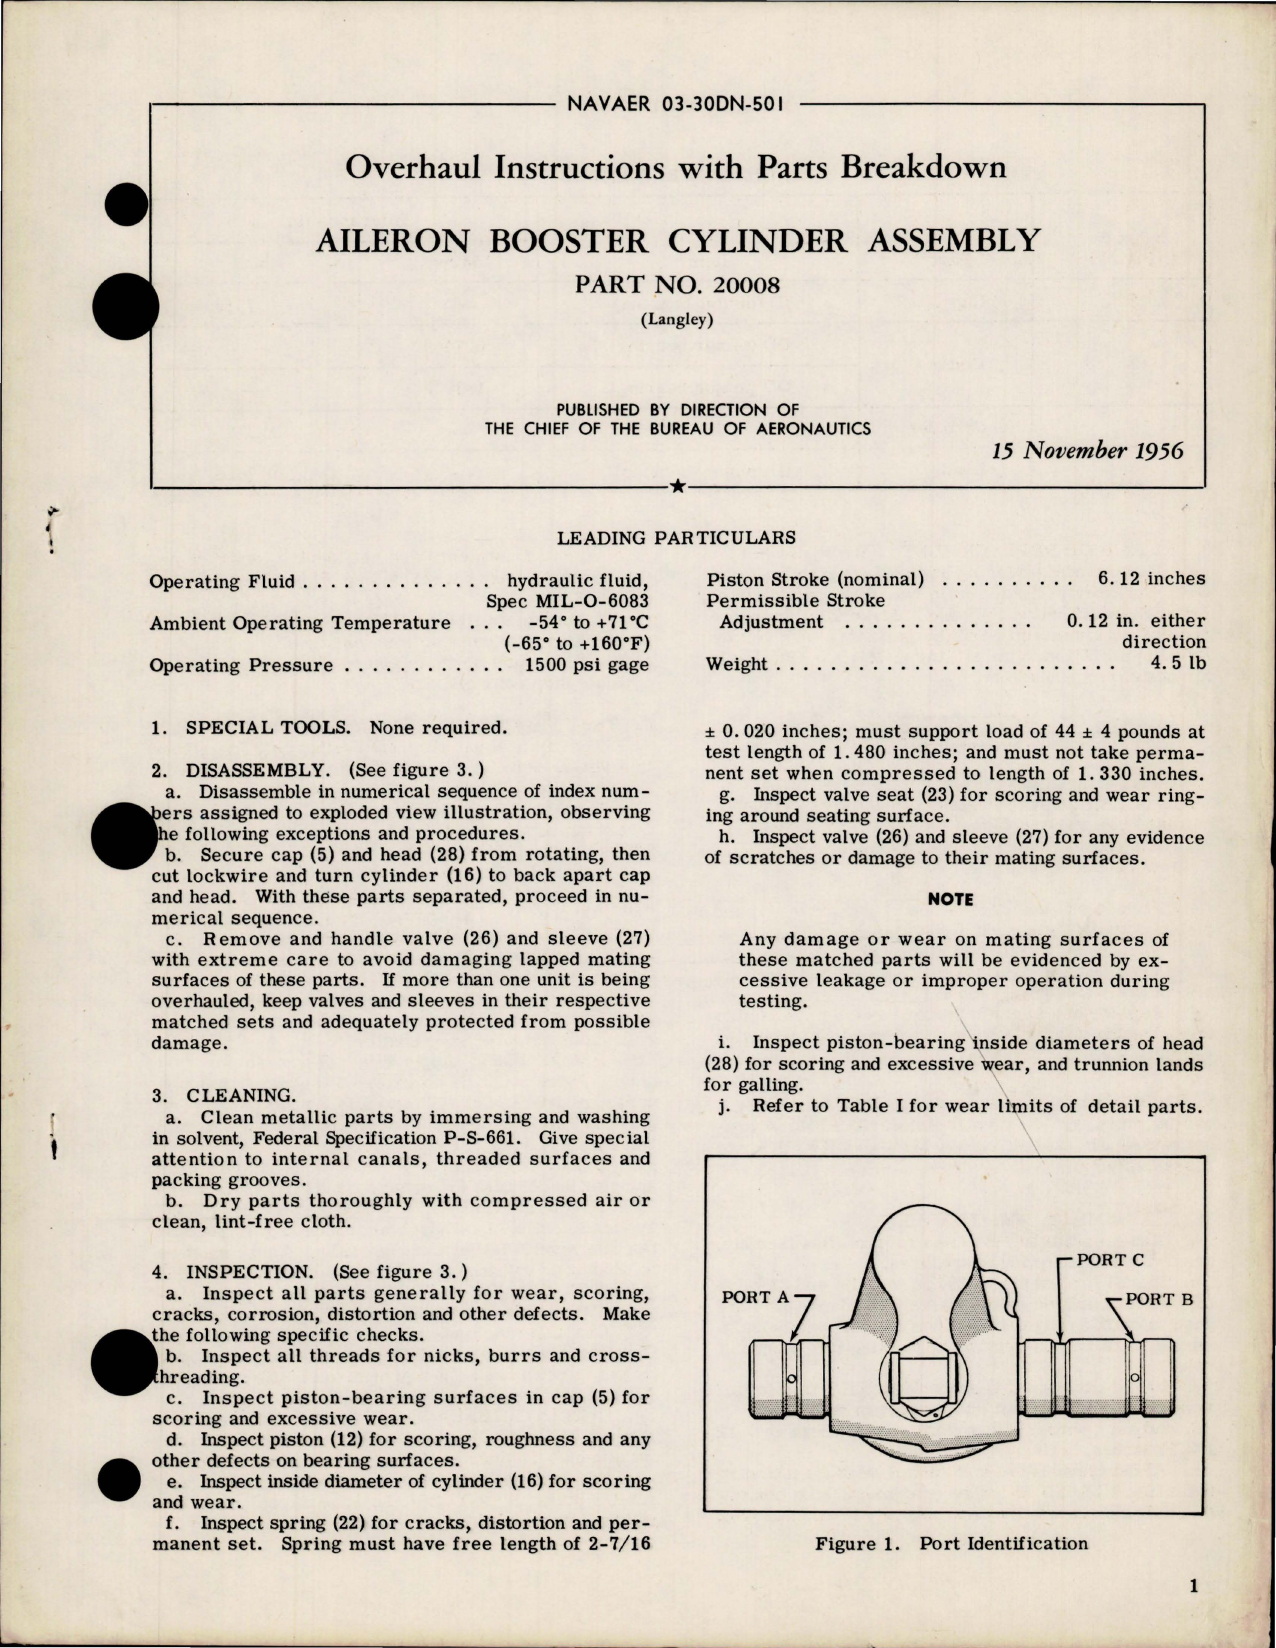 Sample page 1 from AirCorps Library document: Overhaul Instructions with Parts Breakdown for Aileron Booster Cylinder Assembly - Part 20008 